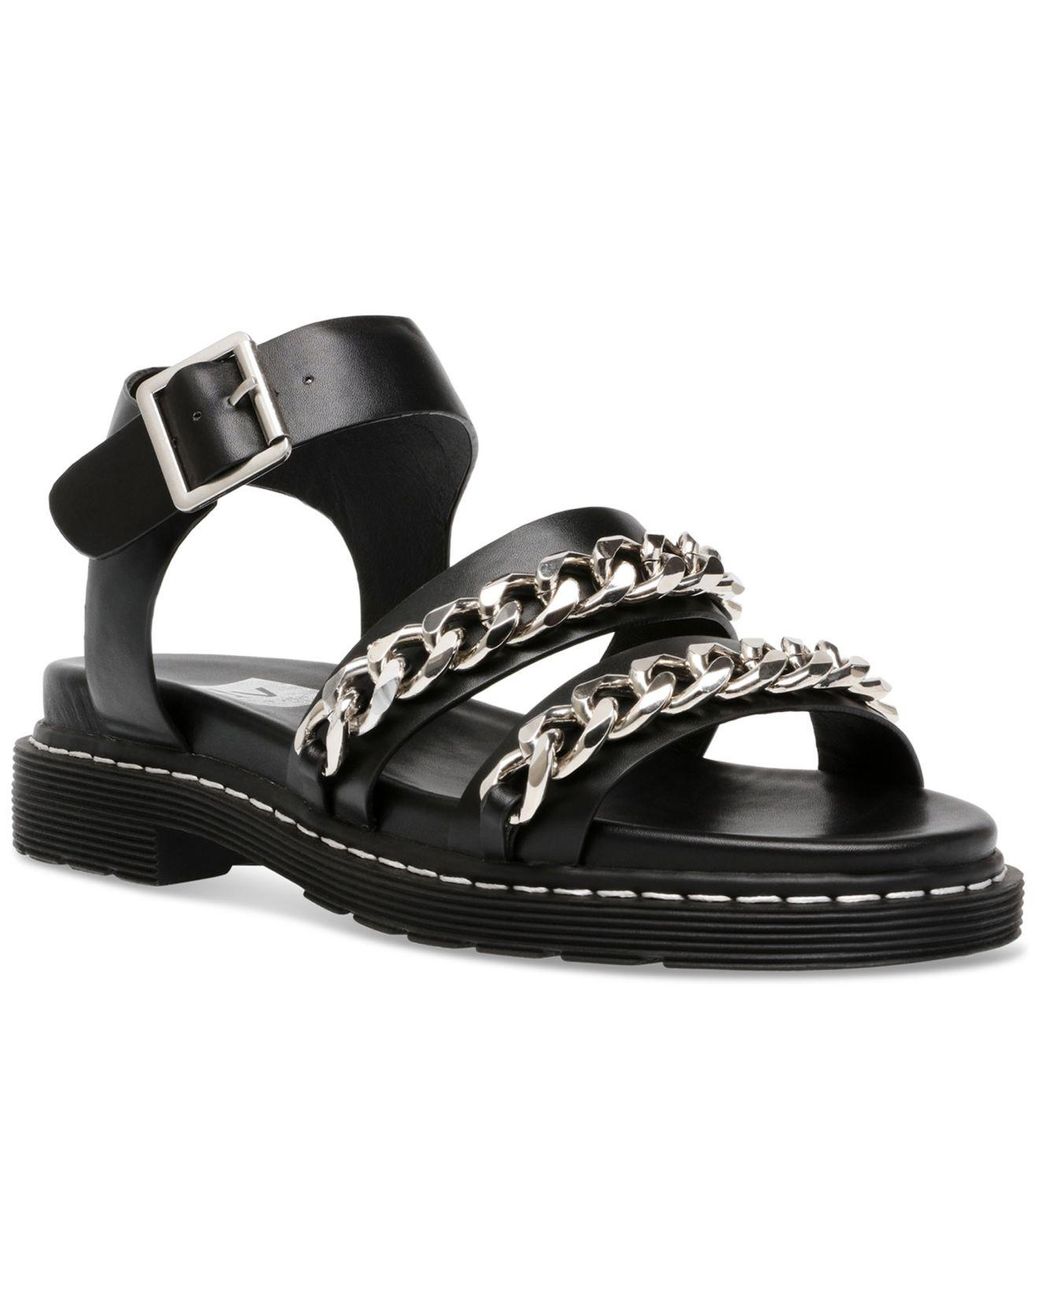 DV by Dolce Vita Mintra Chained Lug Sandals in Black | Lyst